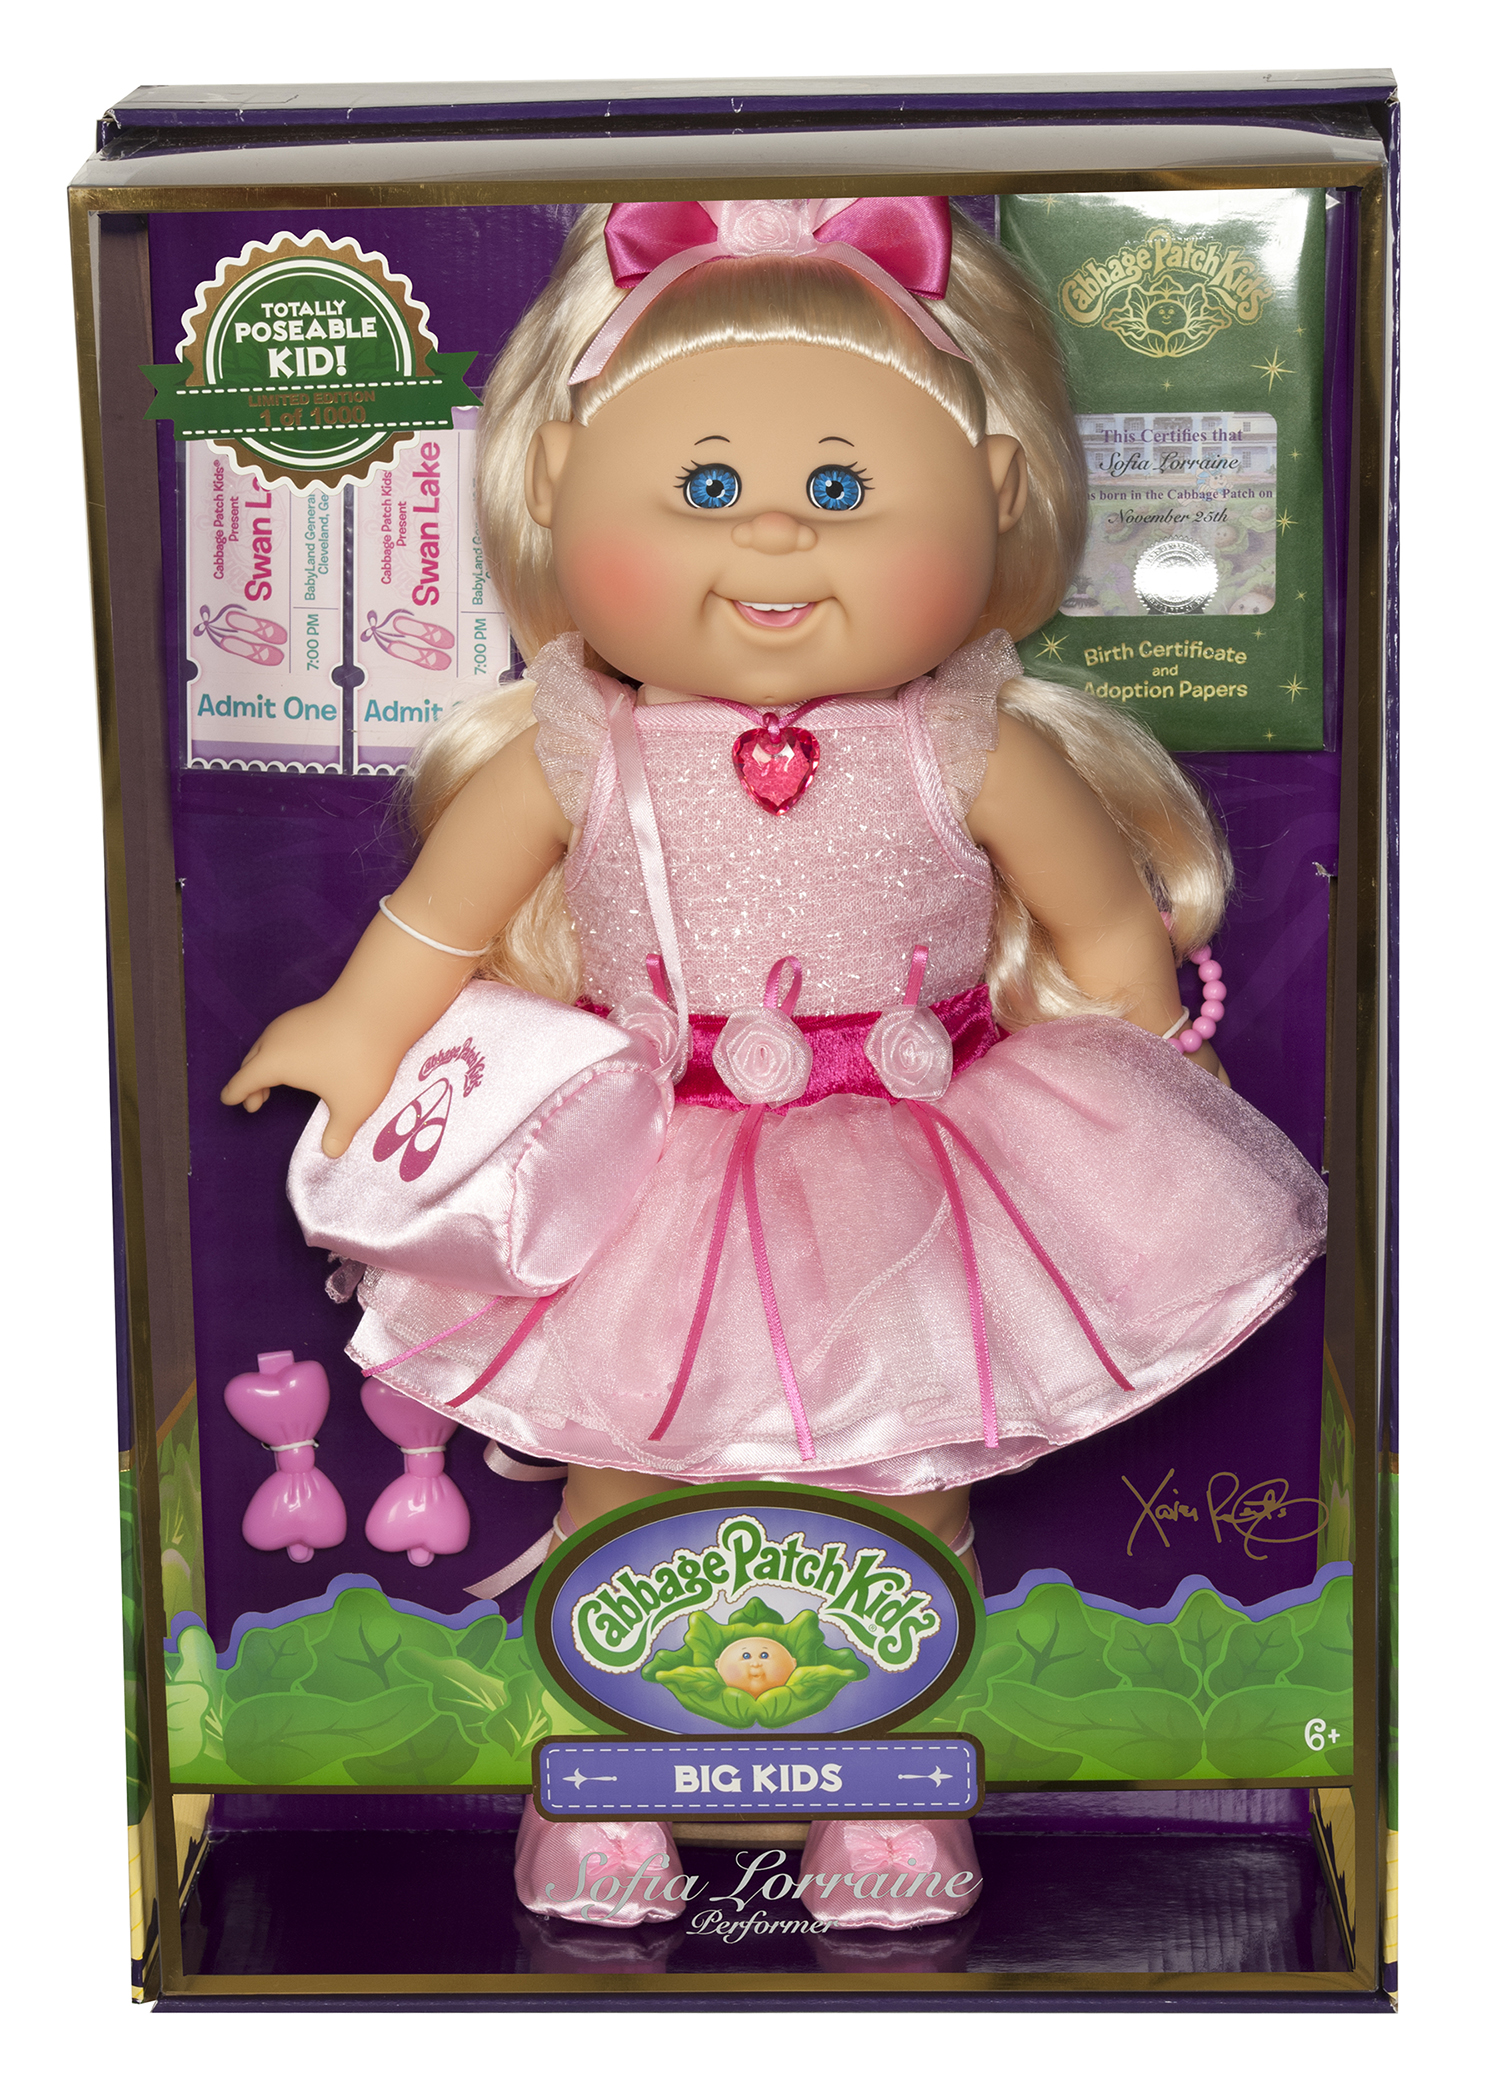 TBT – Giant Cabbage Patch Sighting 